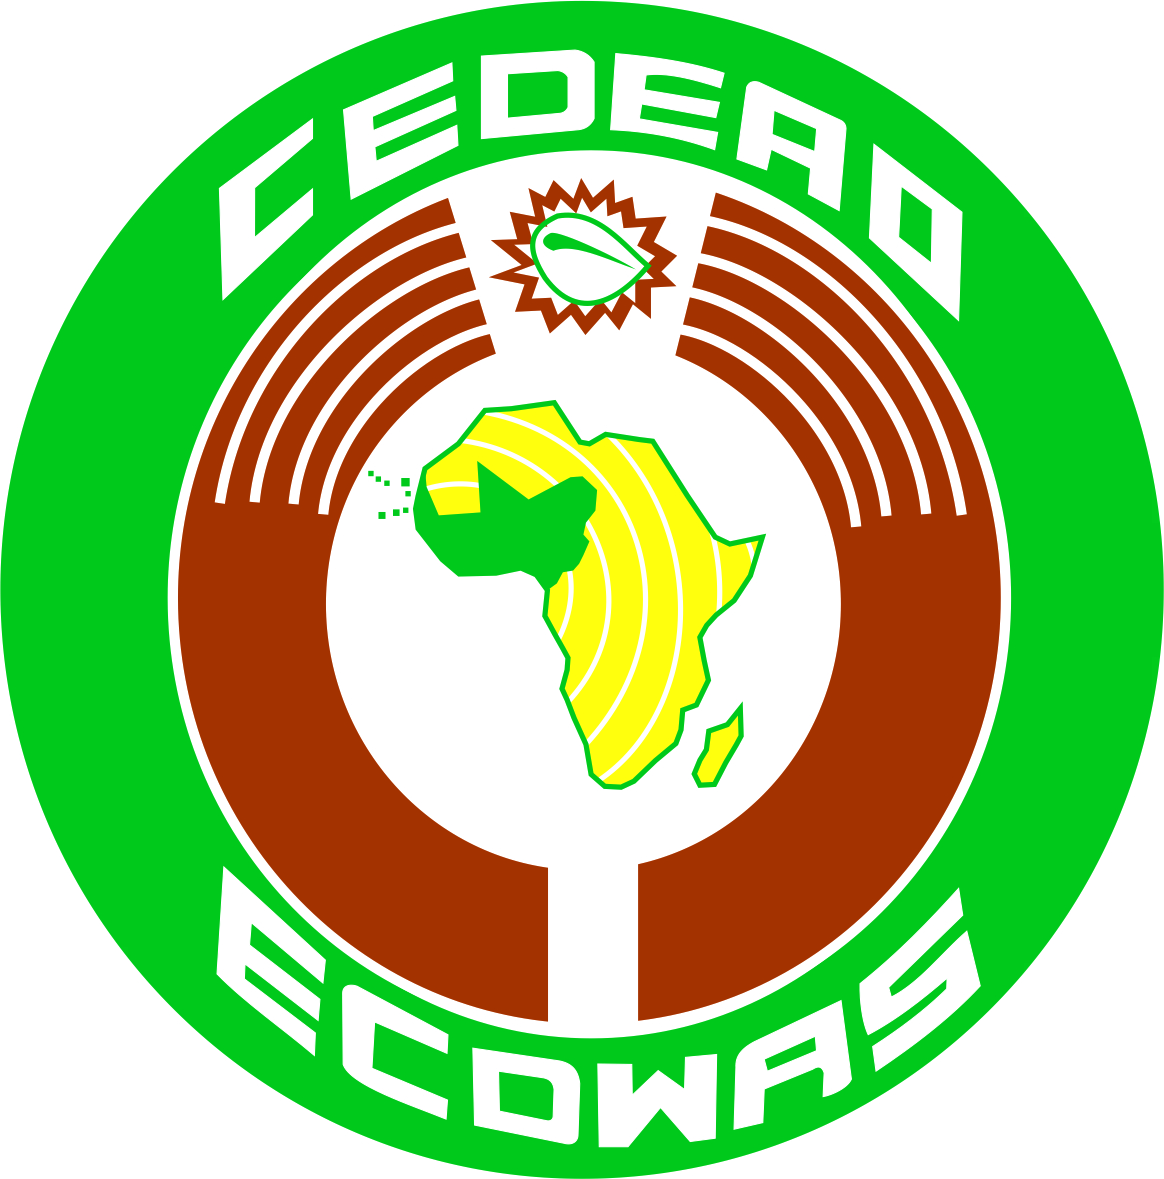 Economic Community of West African States (ECOWAS) implements an In-Country Facilitation Support and Capacity Building Workshop for the ECOWAS Protection and Human Security Integrated Coordination Mechanisms (ECO-PHSICM) in Liberia